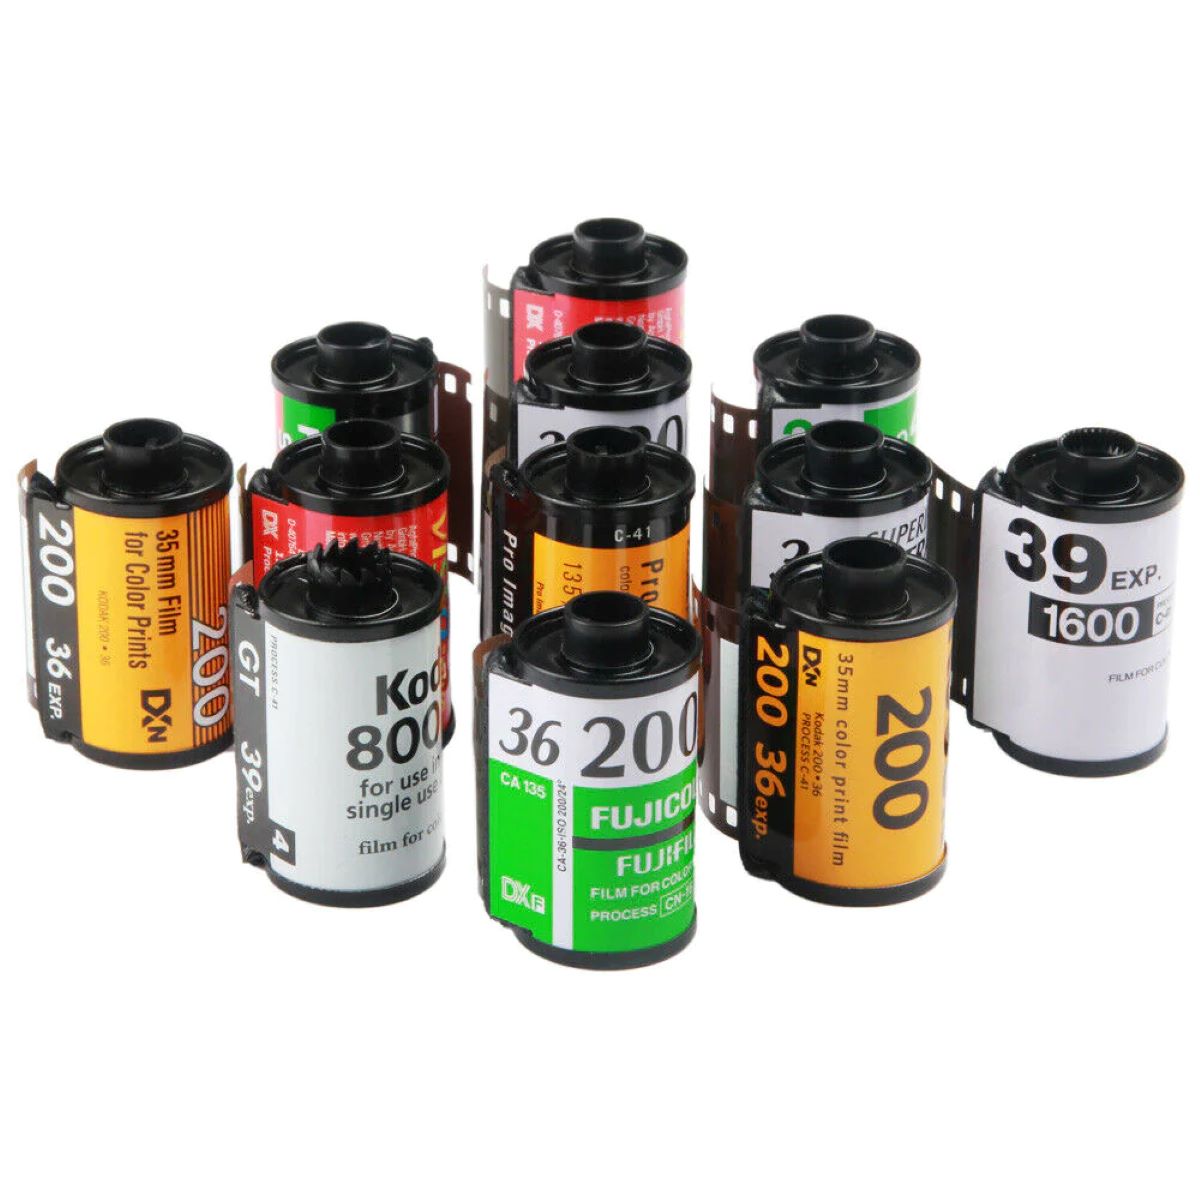 How To Store 35Mm Film